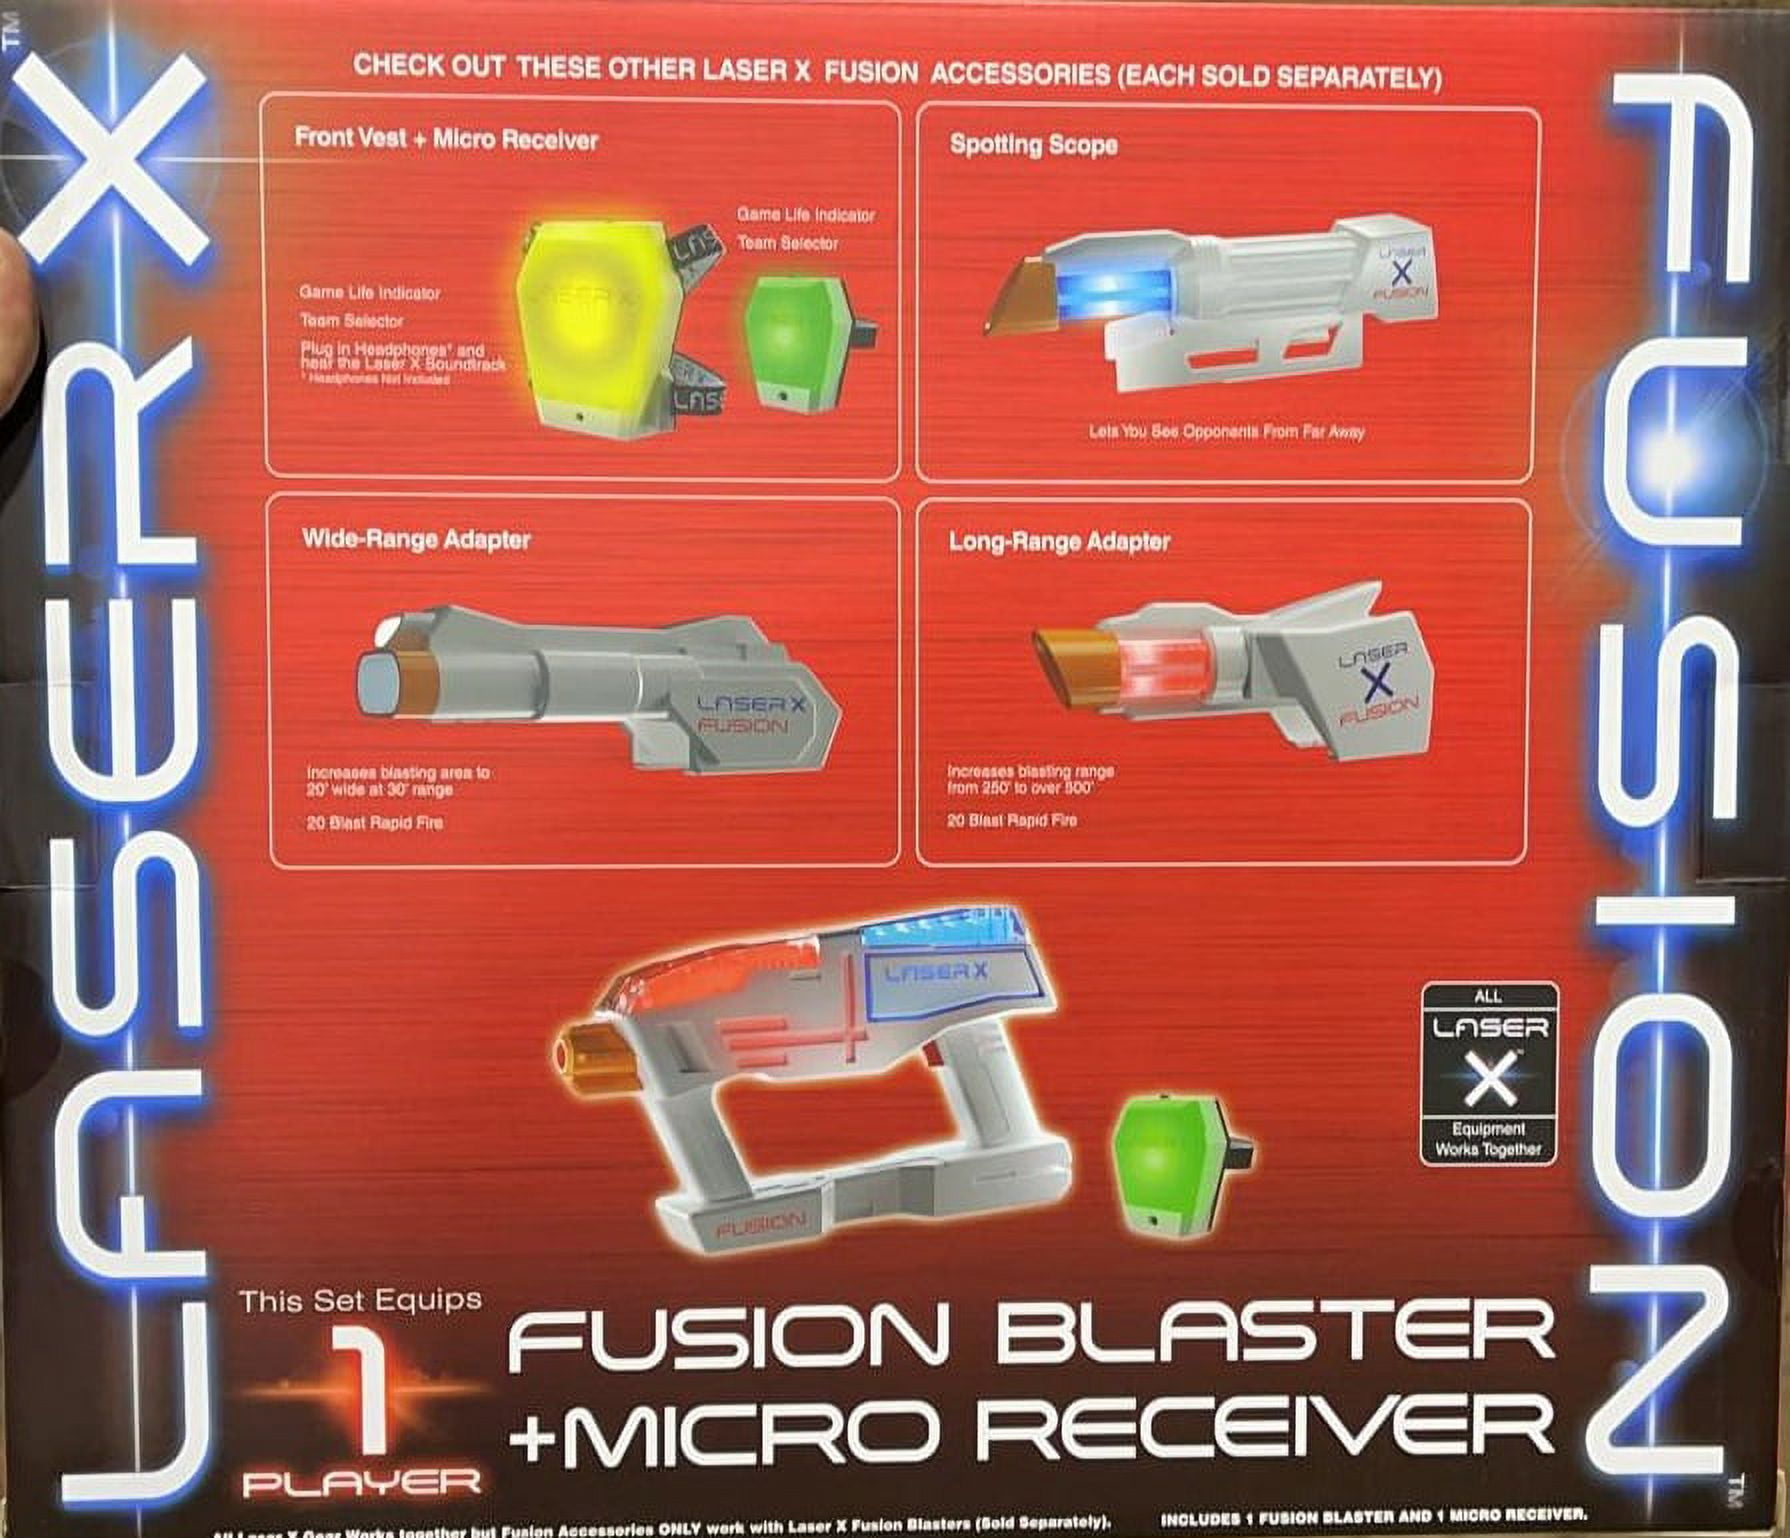 Laser X 2 Pack Fusion Blaster + Micro Receiver, Blaster Toy - One Player  Each Pck - 30 Feet x 20 Wide Range - Fun for at Home or Outdoor  Entertainment